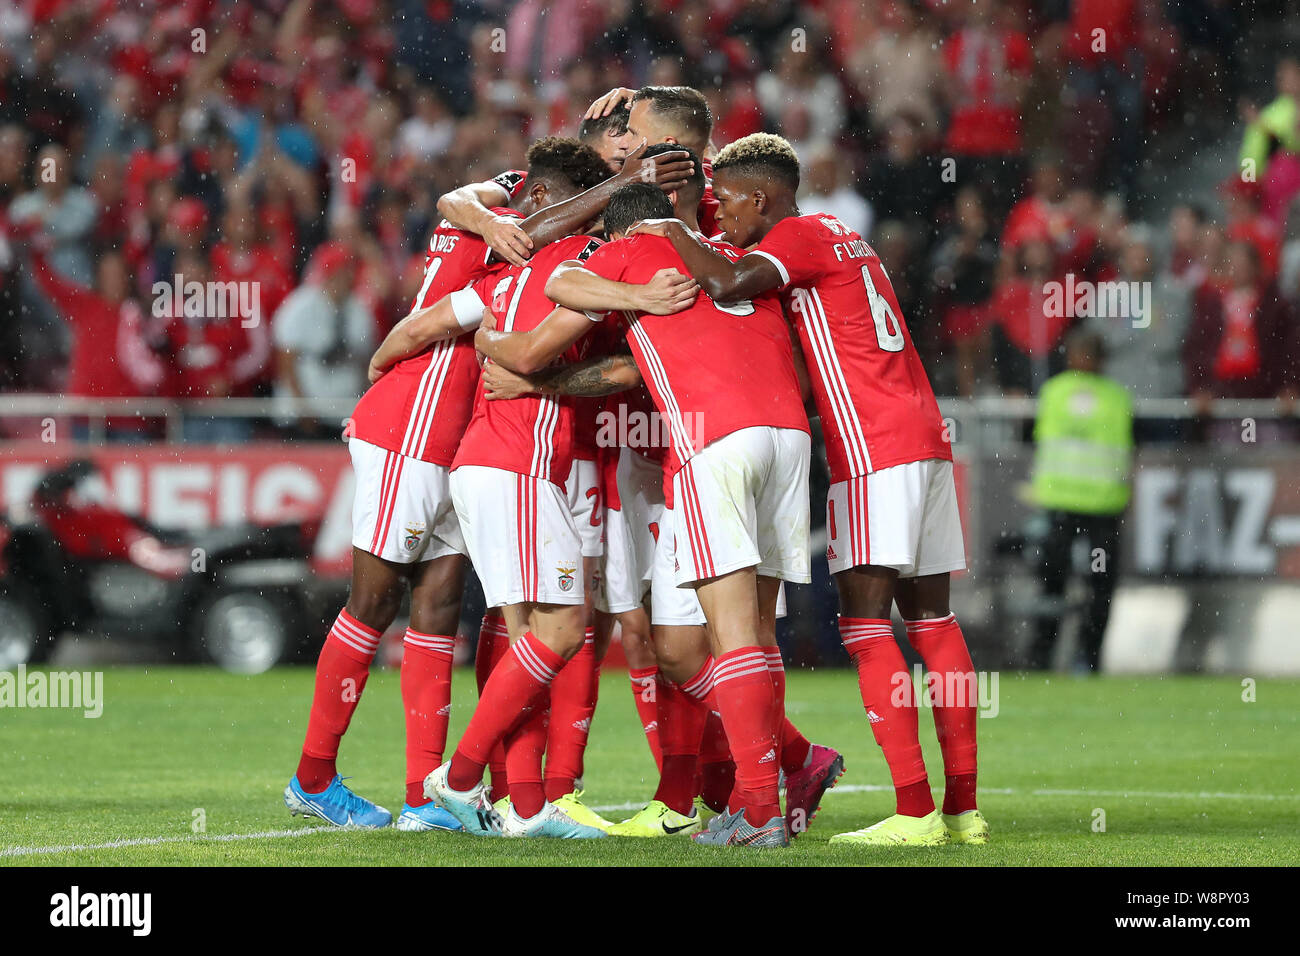 Lisbon, Portugal. 10th Aug, 2019. Benfica's players celebrate after scoring during the Portuguese league football match between Benfica and Pacos de Ferreira in Lisbon, Portugal, on Aug. 10, 2019. Credit: Petro Fiuza/Xinhua/Alamy Live News Stock Photo